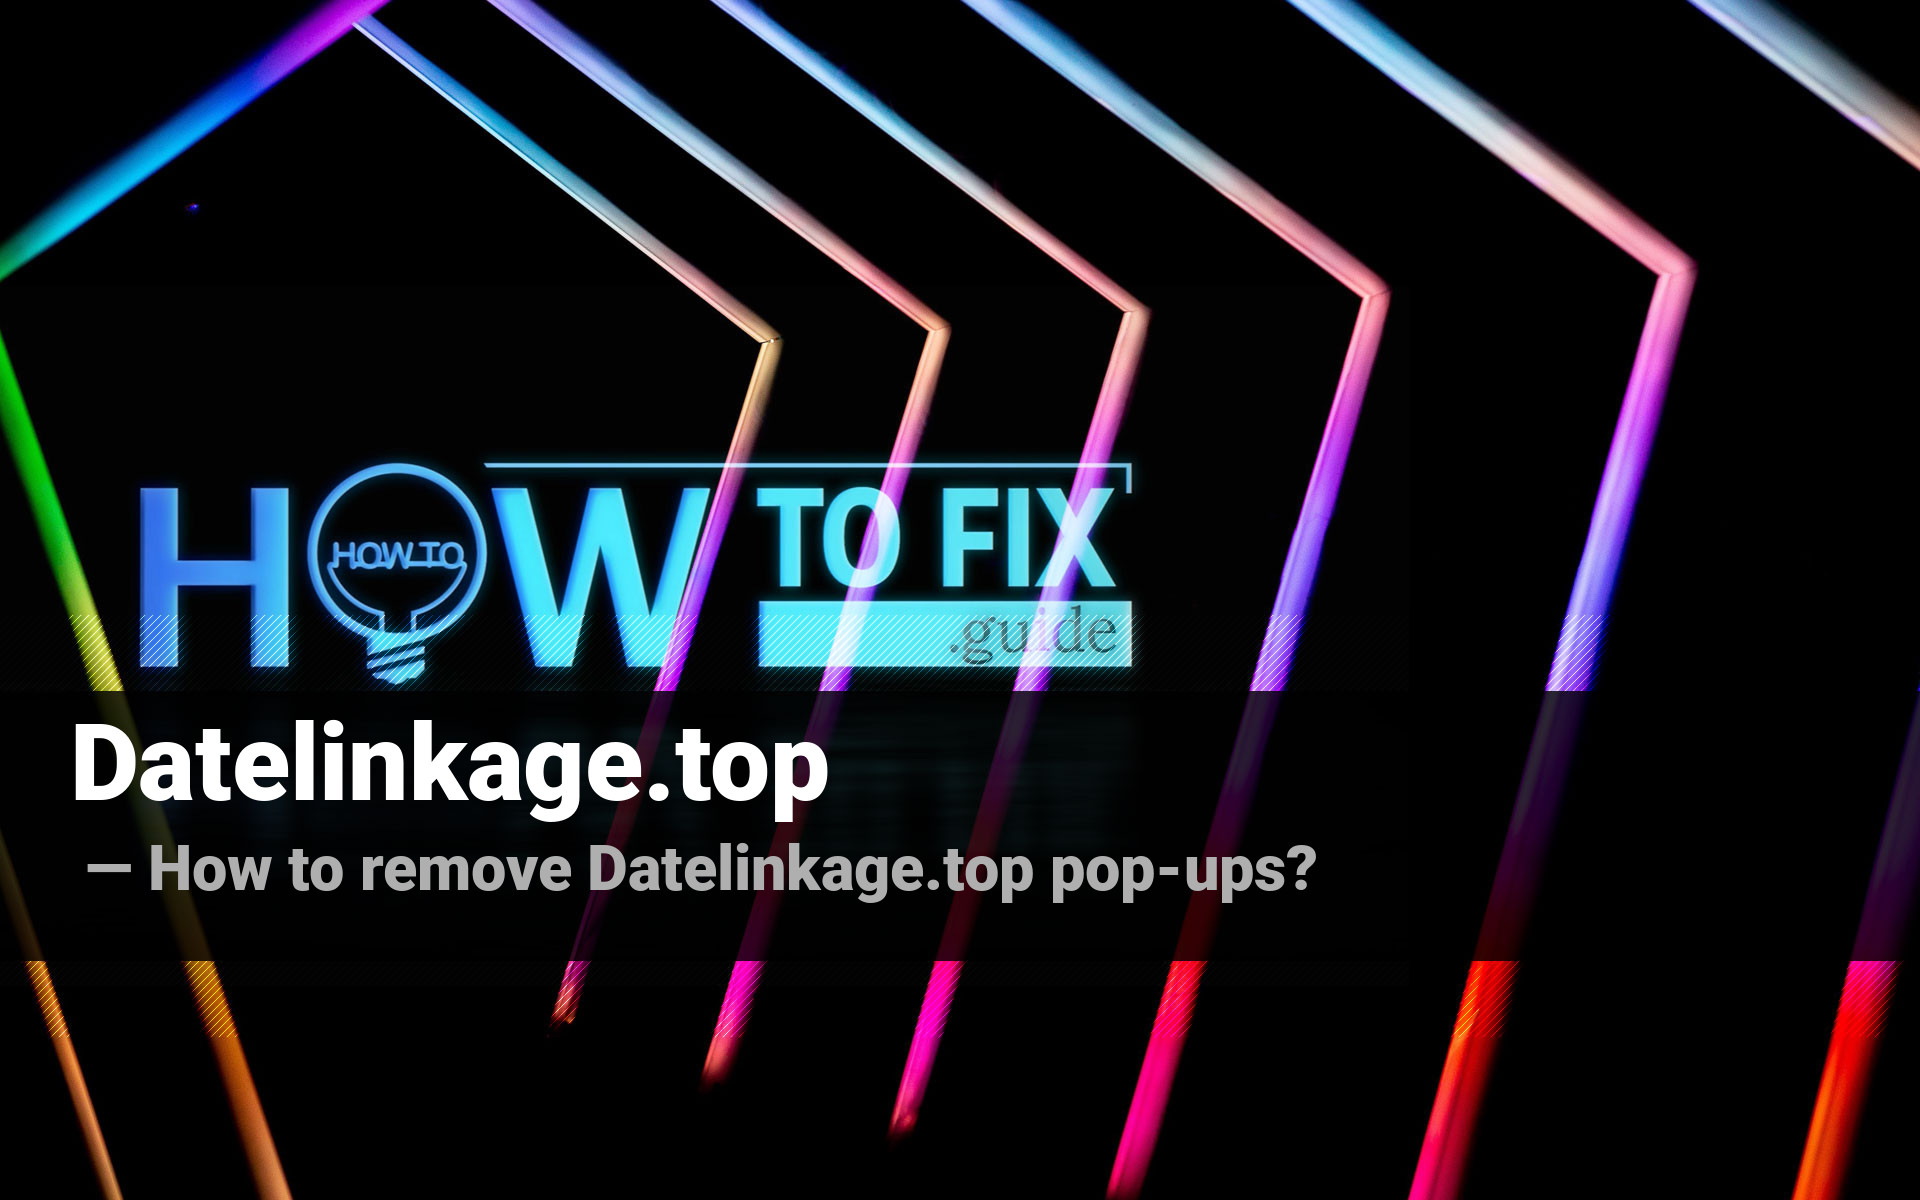 Datelinkage.top Popup Virus — How to Remove Unwanted Ads?